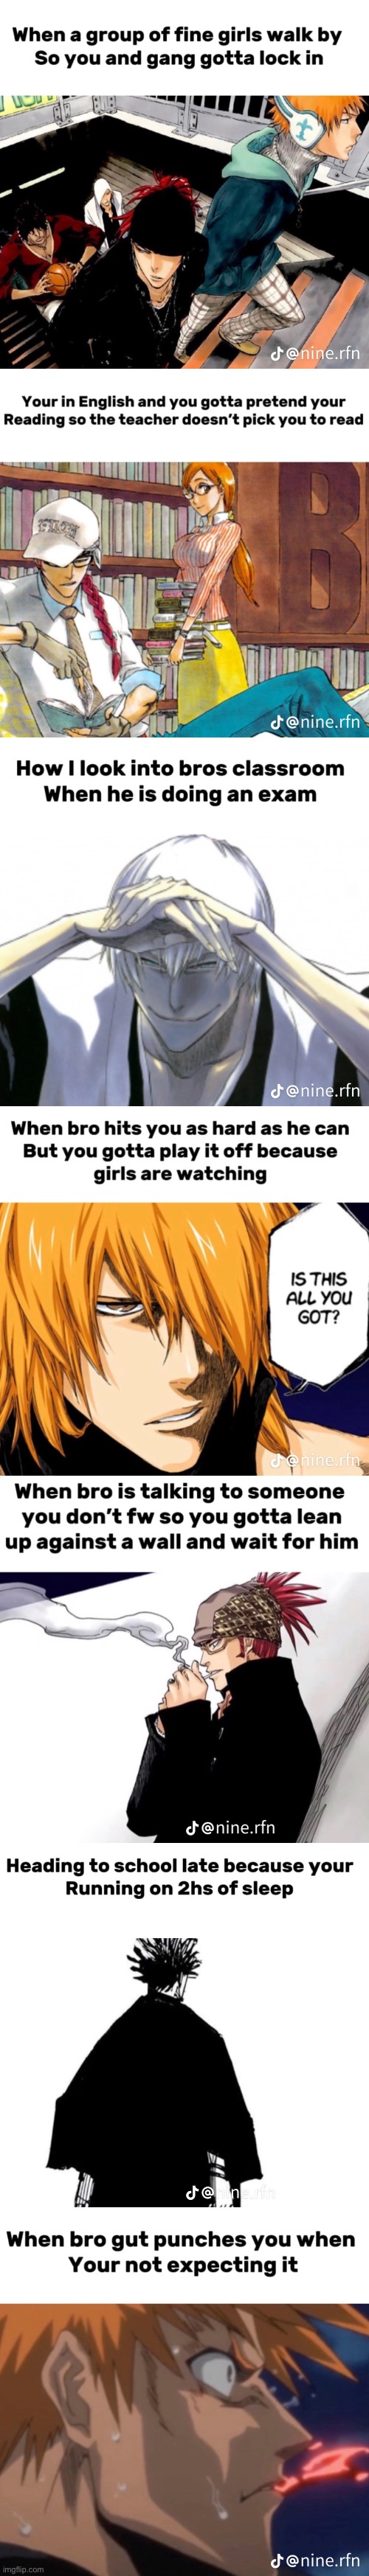 random memes I stole from tik tok | image tagged in memes,bleach | made w/ Imgflip meme maker